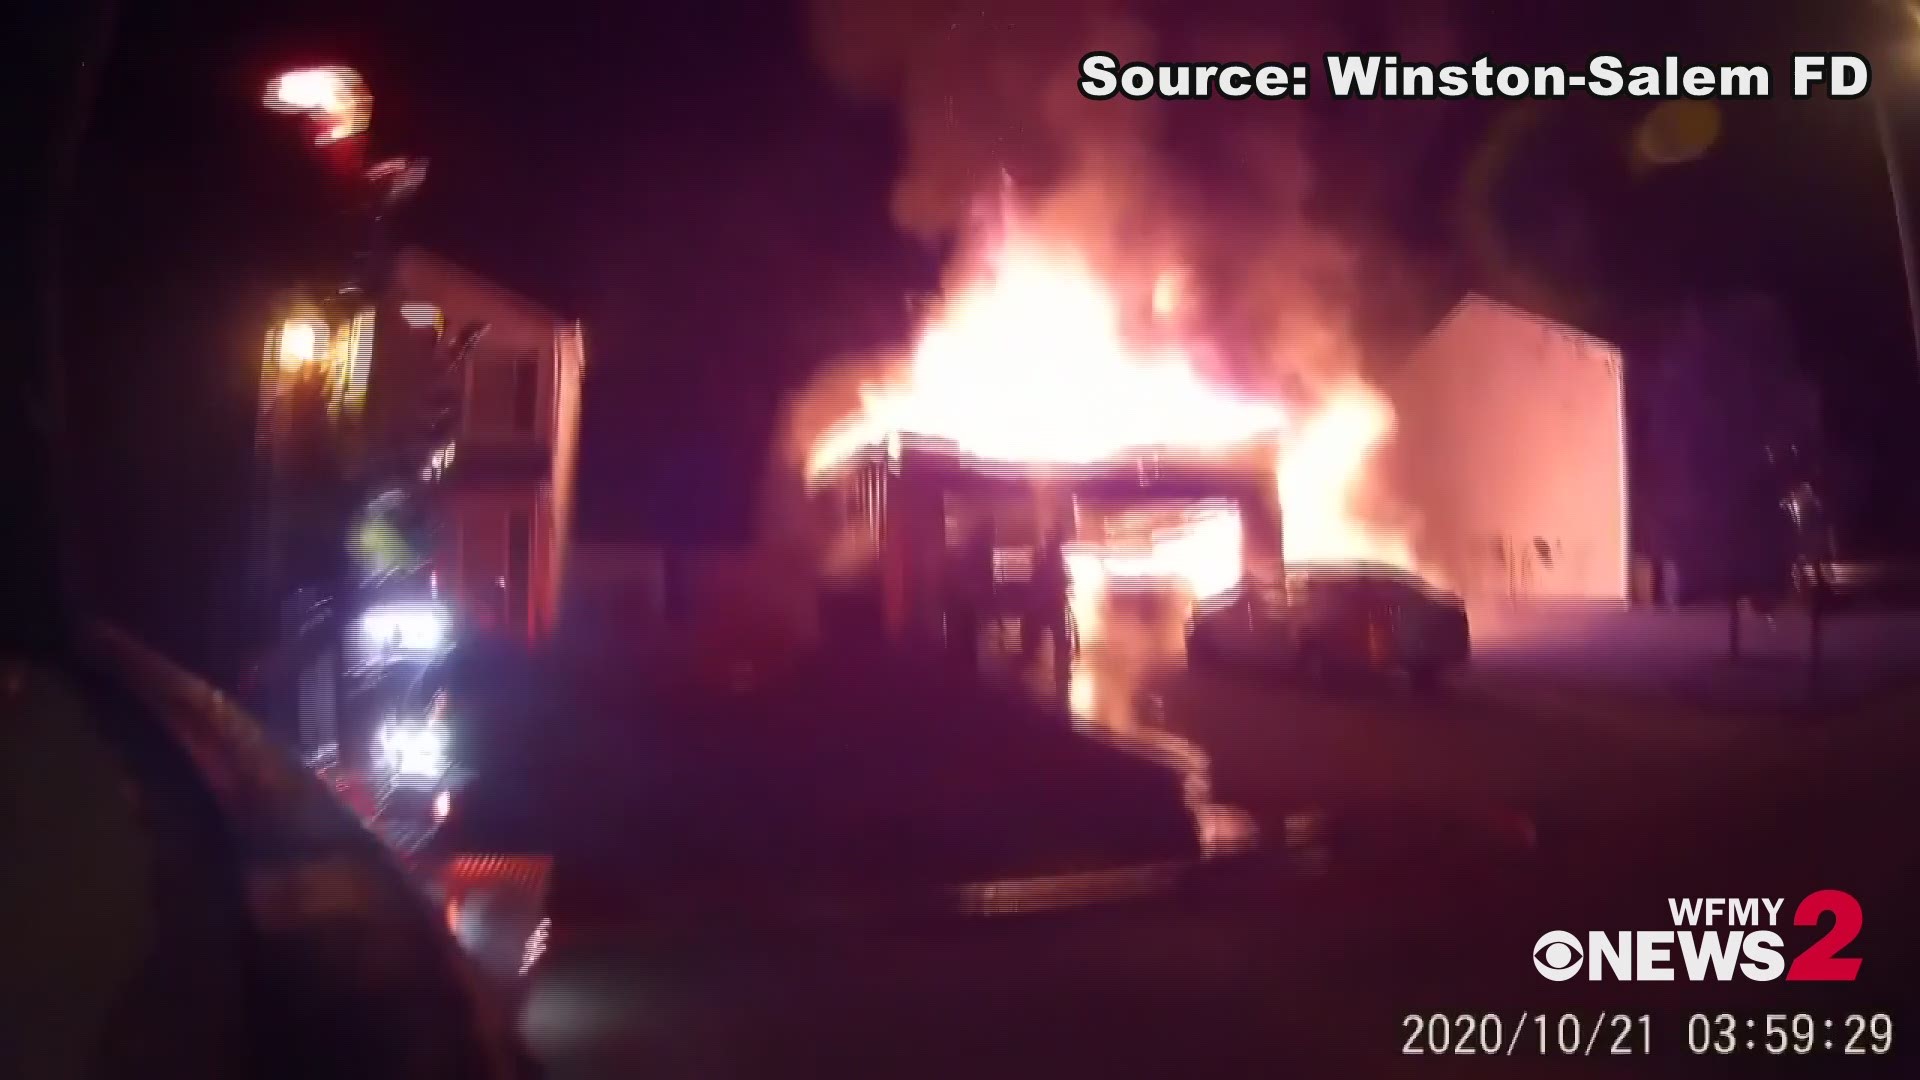 The Winston-Salem Fire Department shared this bodycam footage of a huge overnight fire on the 5000 block of Liberty Hall Circle.